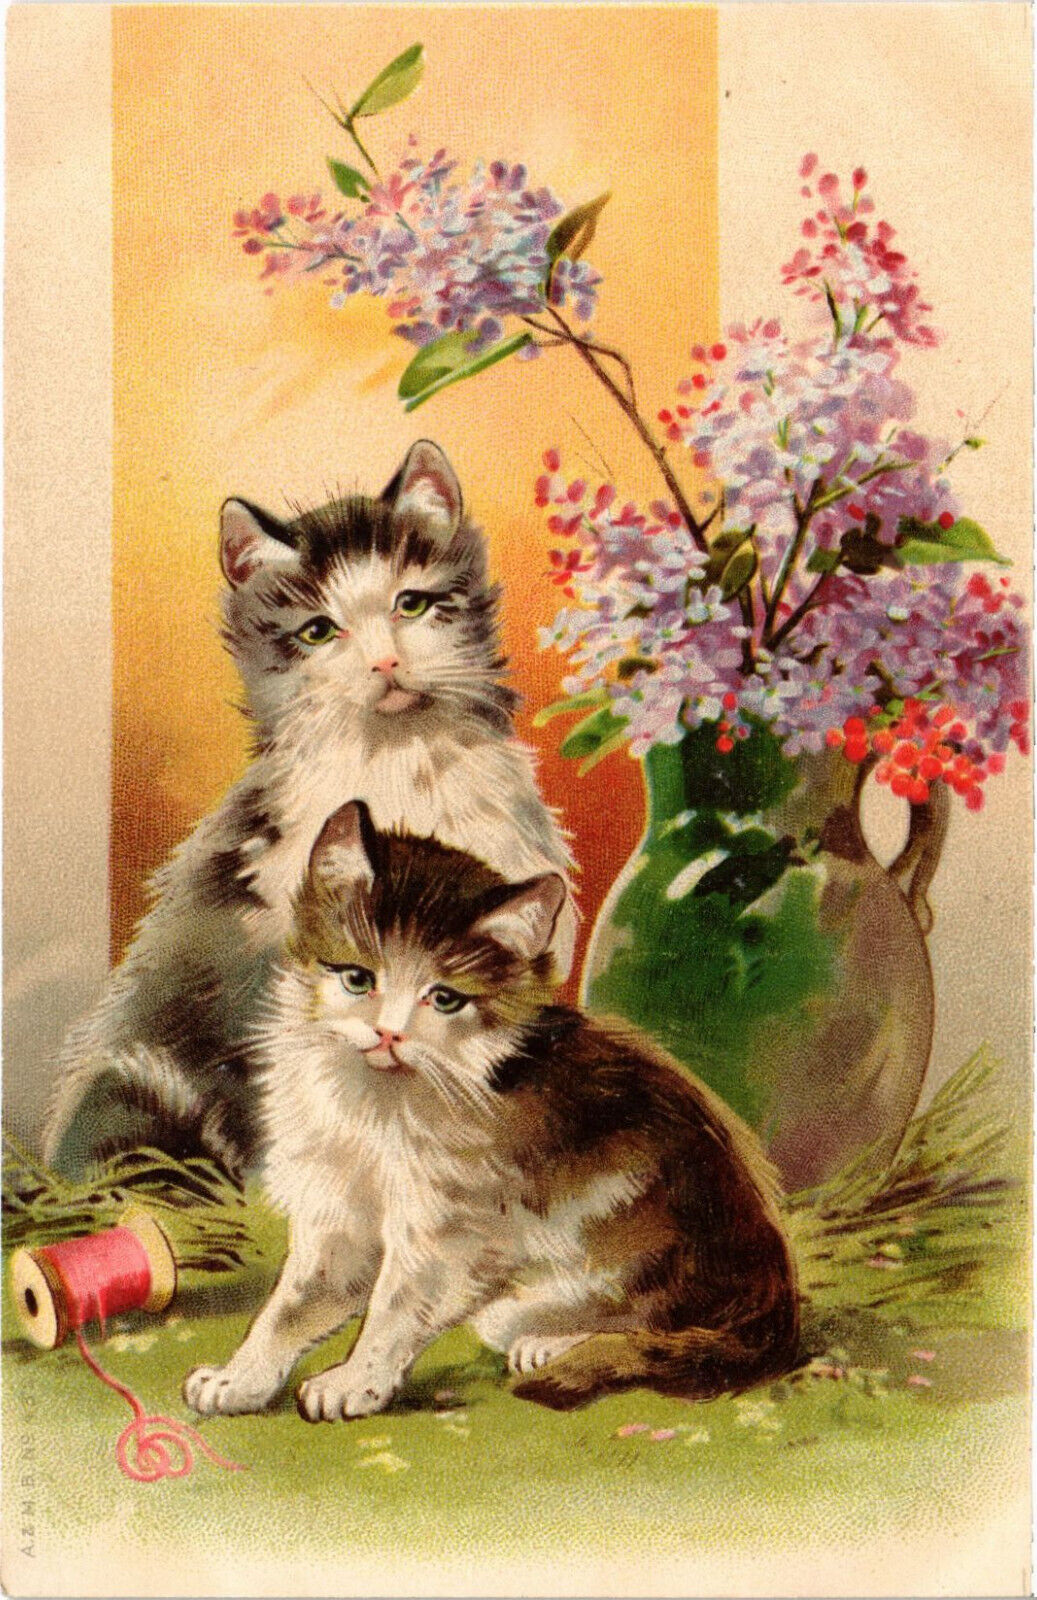 PC CATS, TWO CATS WITH FLOWERS, Vintage LITHO Postcard (b46675)